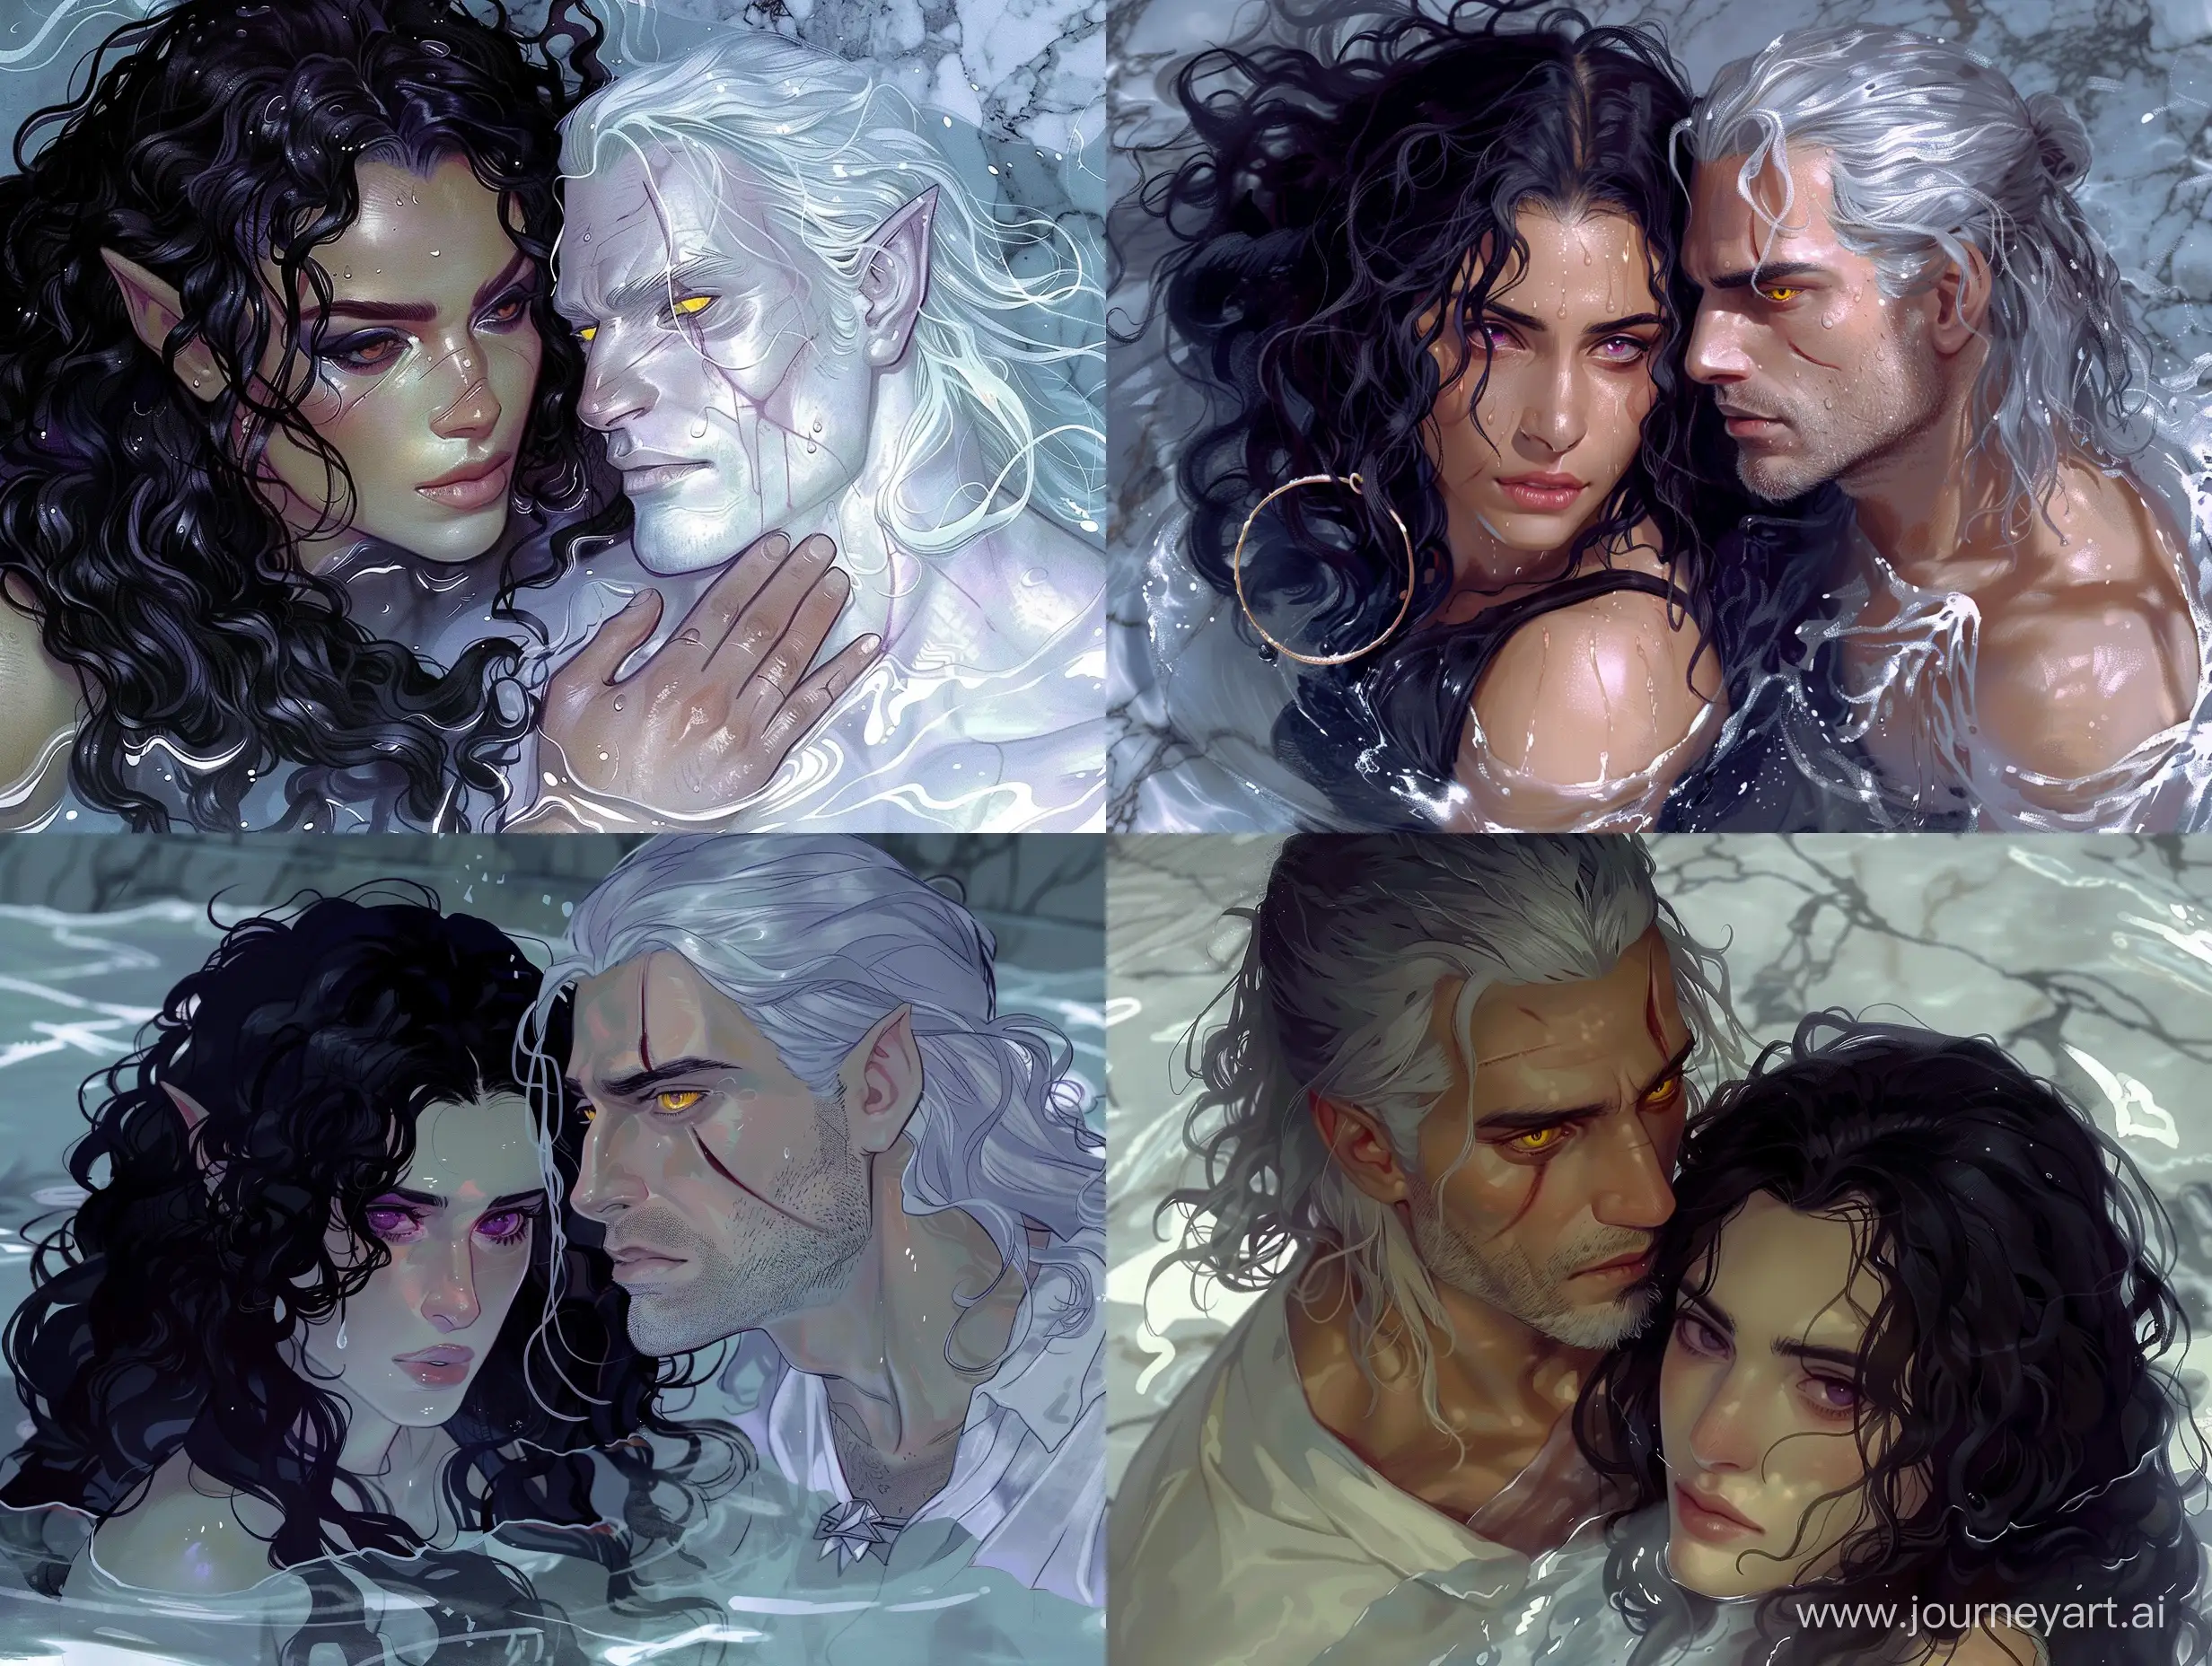 Geralt-and-Yennefer-Embrace-in-Marble-Pool